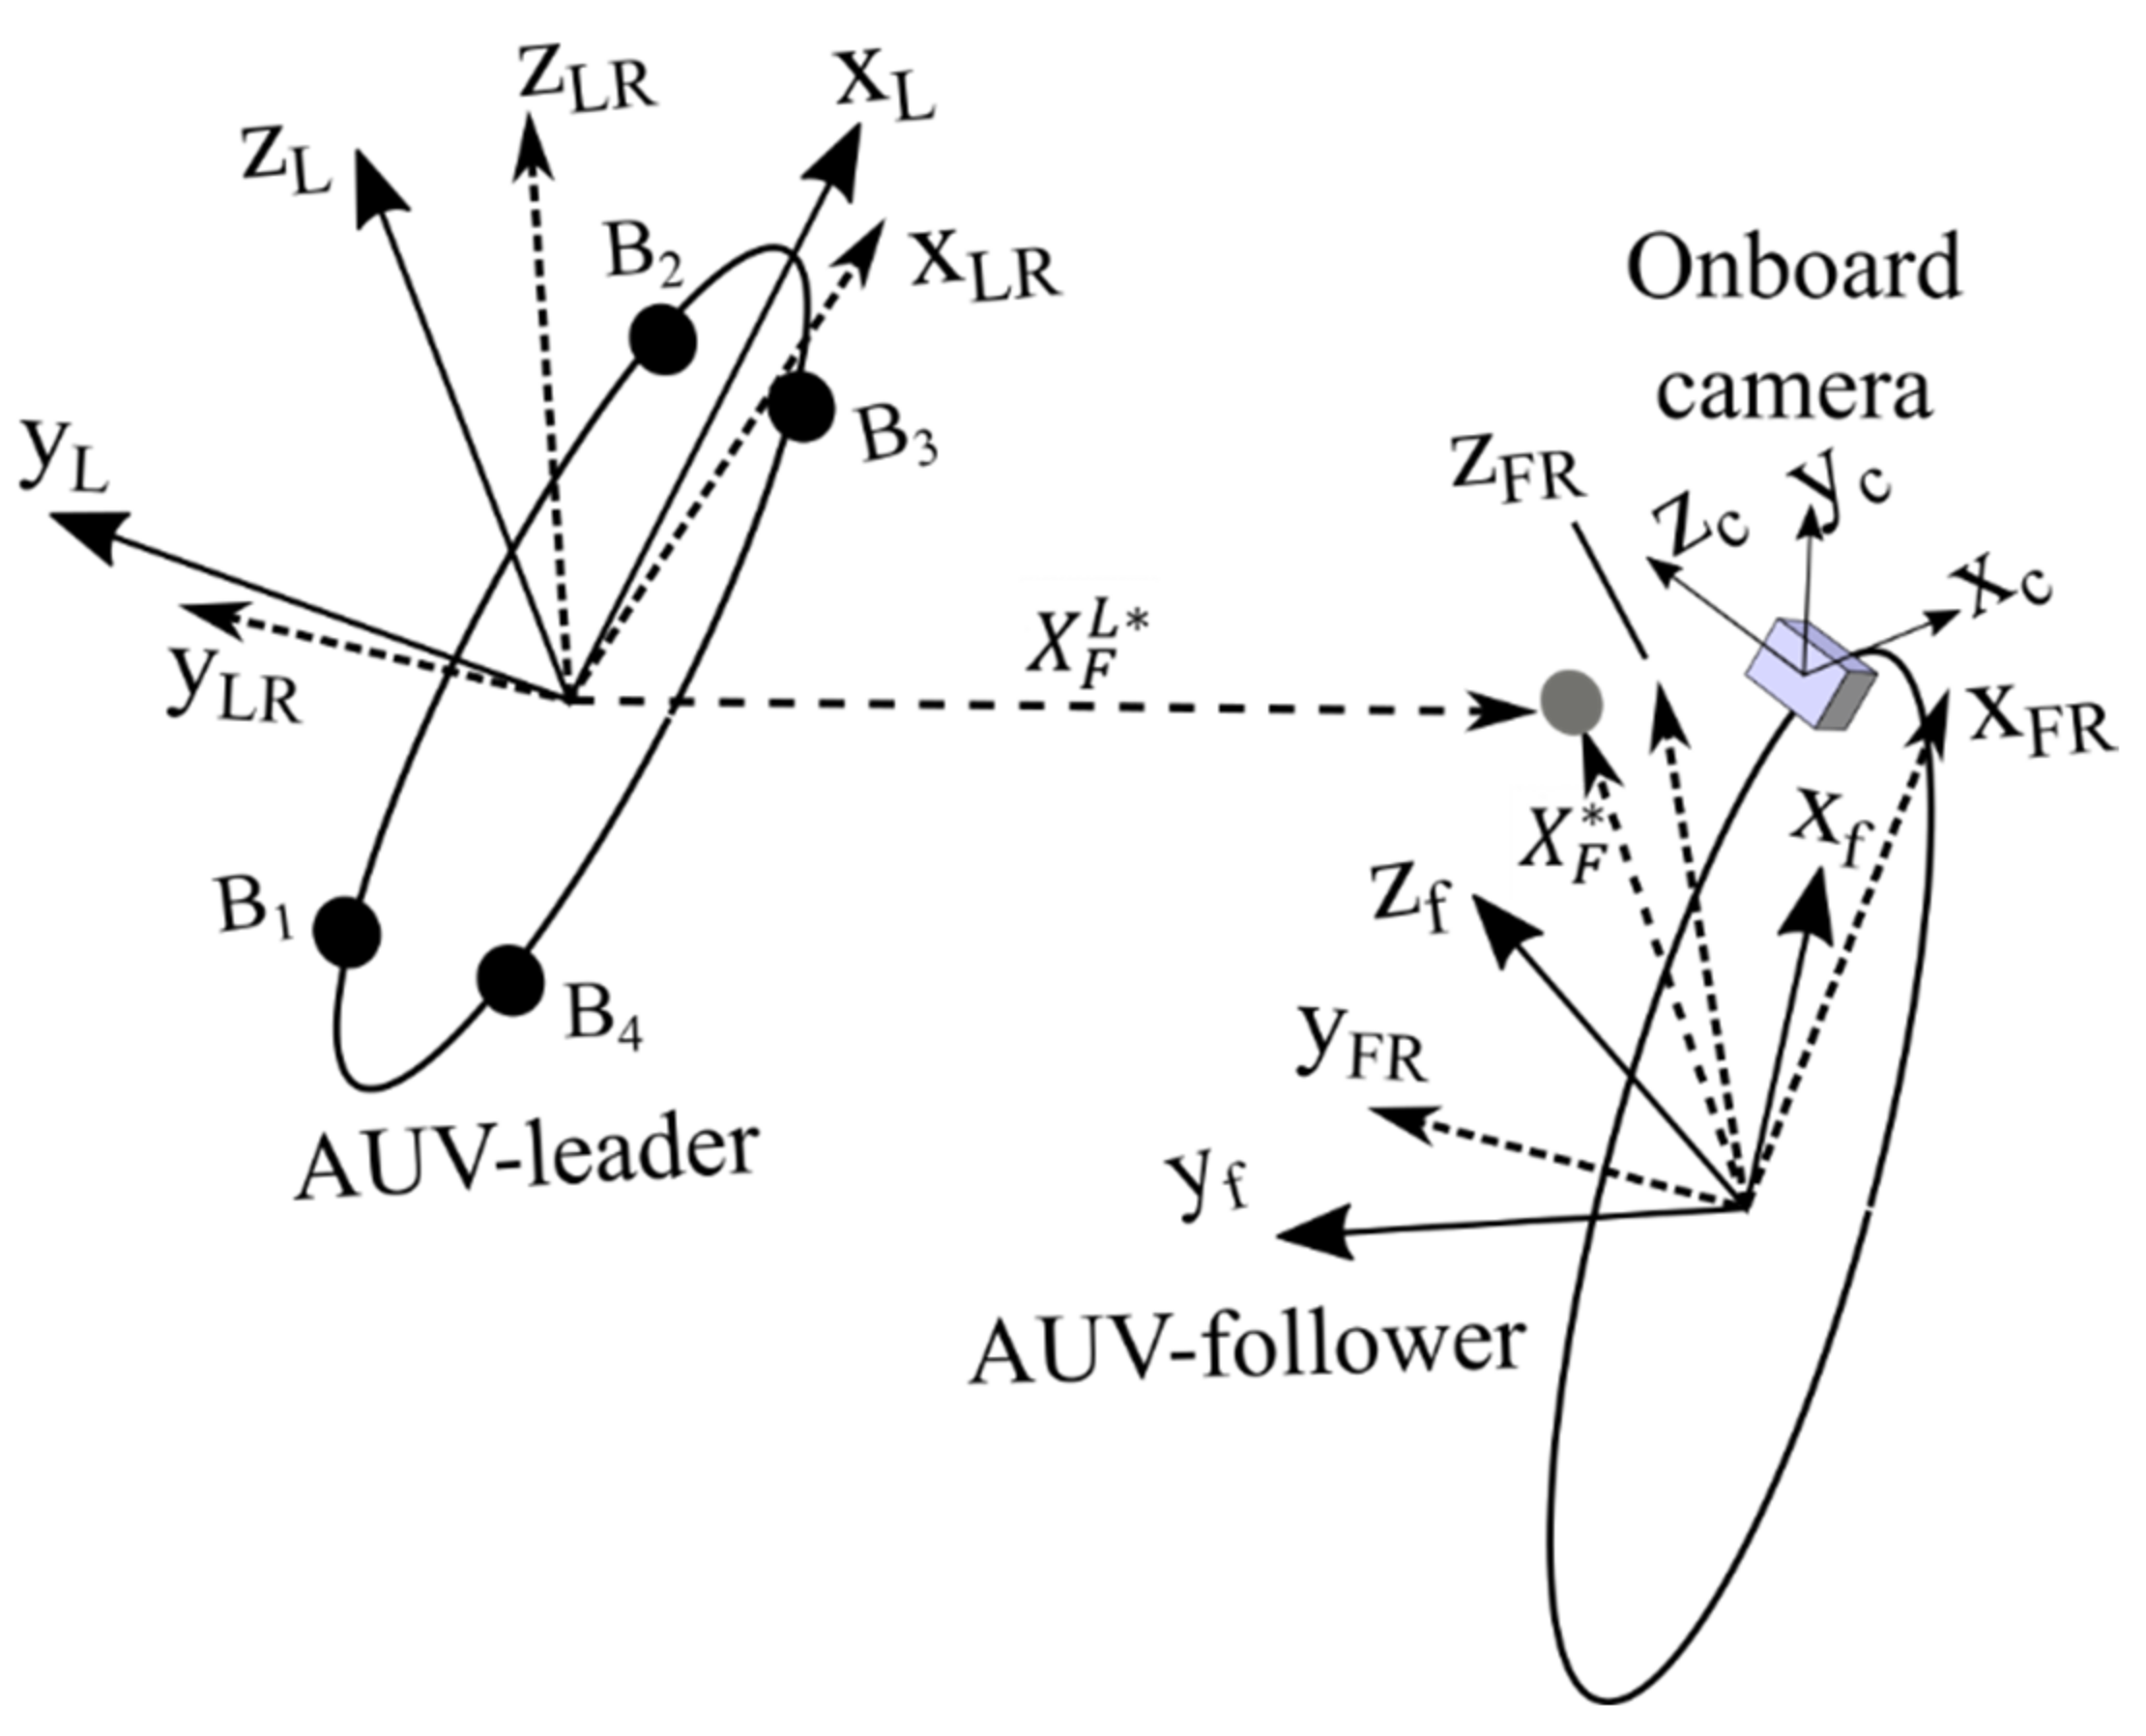 JMSE | Free Full-Text | The AUV-Follower Control System Based on the  Prediction of the AUV-Leader Movement Using Data from the Onboard Video  Camera